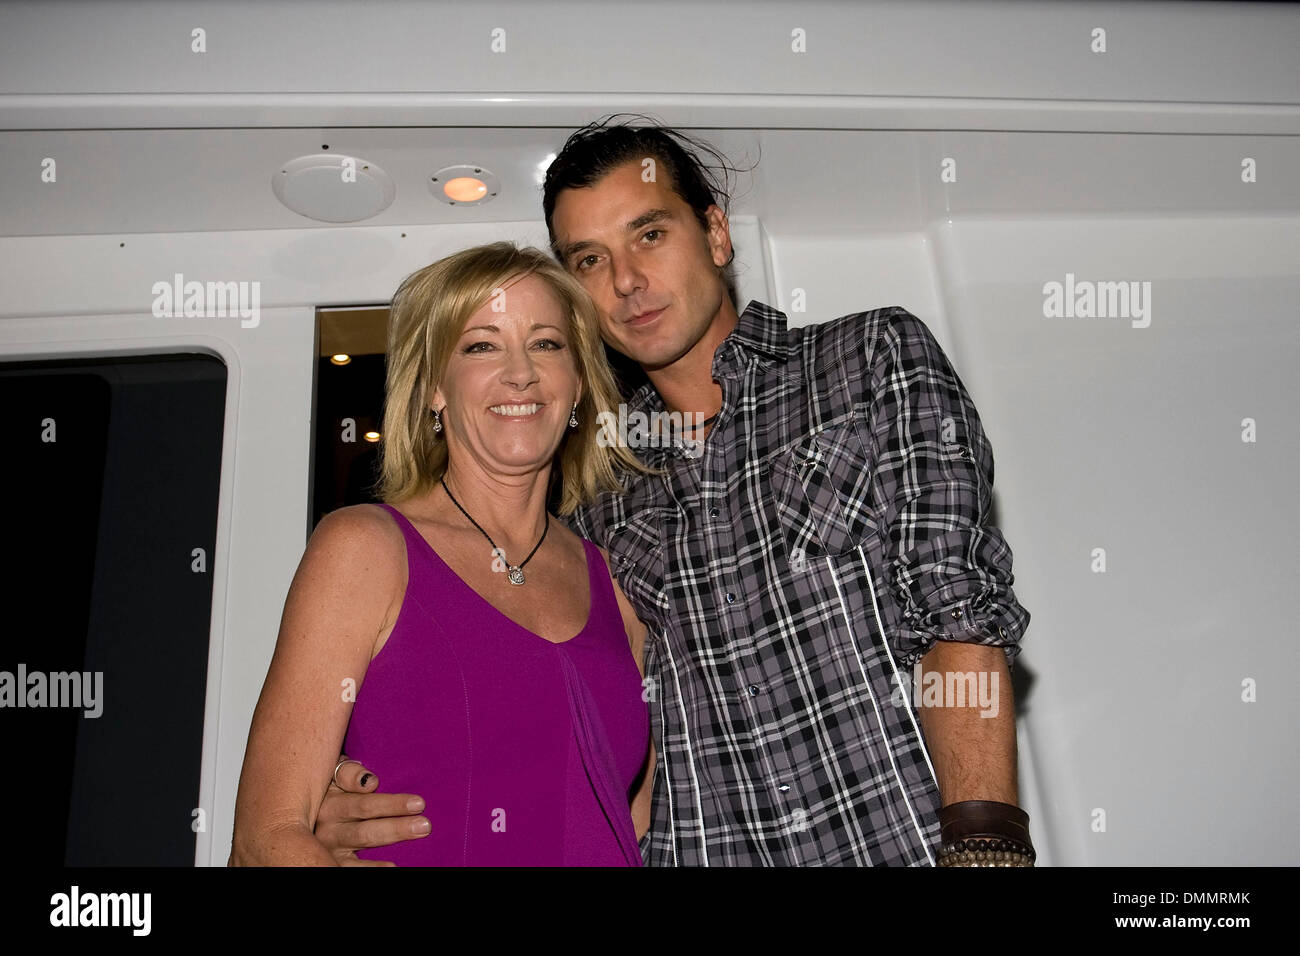 Nov 05, 2009 - Delray Beach, Florida, United States - CHRIS EVERT and GAVIN ROSSDALE on the yacht, Claire at the Boca Raton Resort & Club, for the private party hosted by Chris Evert during the 2009 Chris Evert/Raymond James Pro-Celebrity Tennis Classic.   (Credit Image: © Susan Mullane/ZUMA Press) Stock Photo